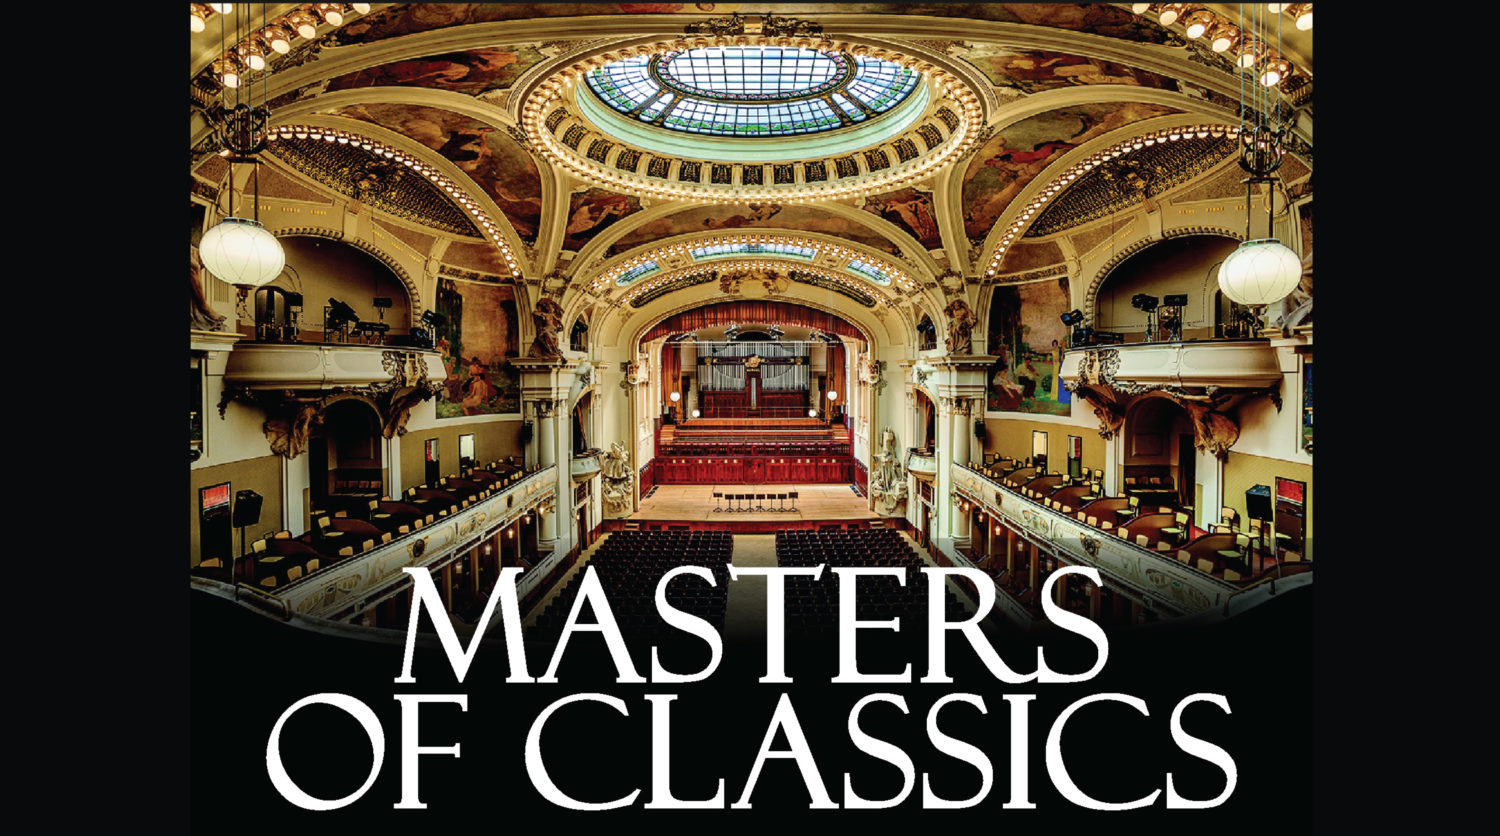 MASTERS OF CLASSICS IN THE MUNICIPAL HOUSE 20.02.2020